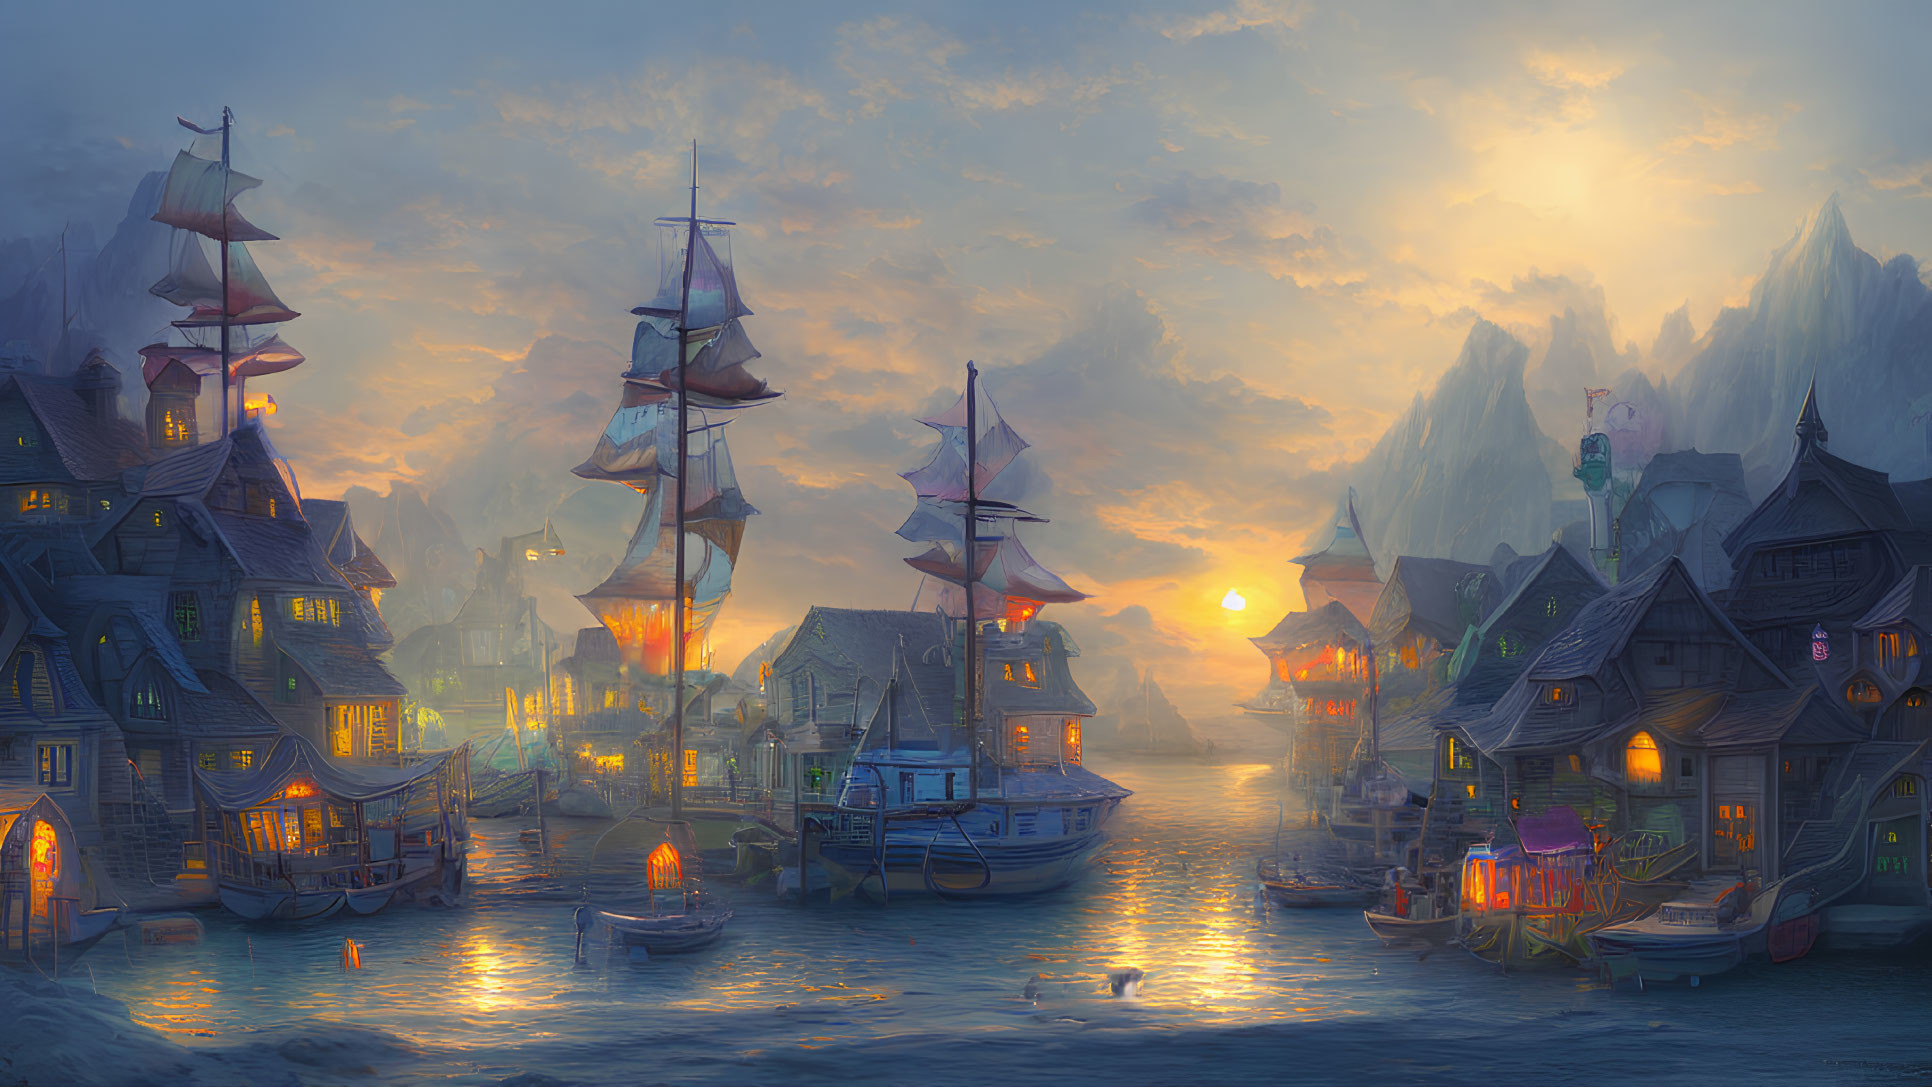 Fantasy harbor scene at dusk with tall ships and glowing lanterns